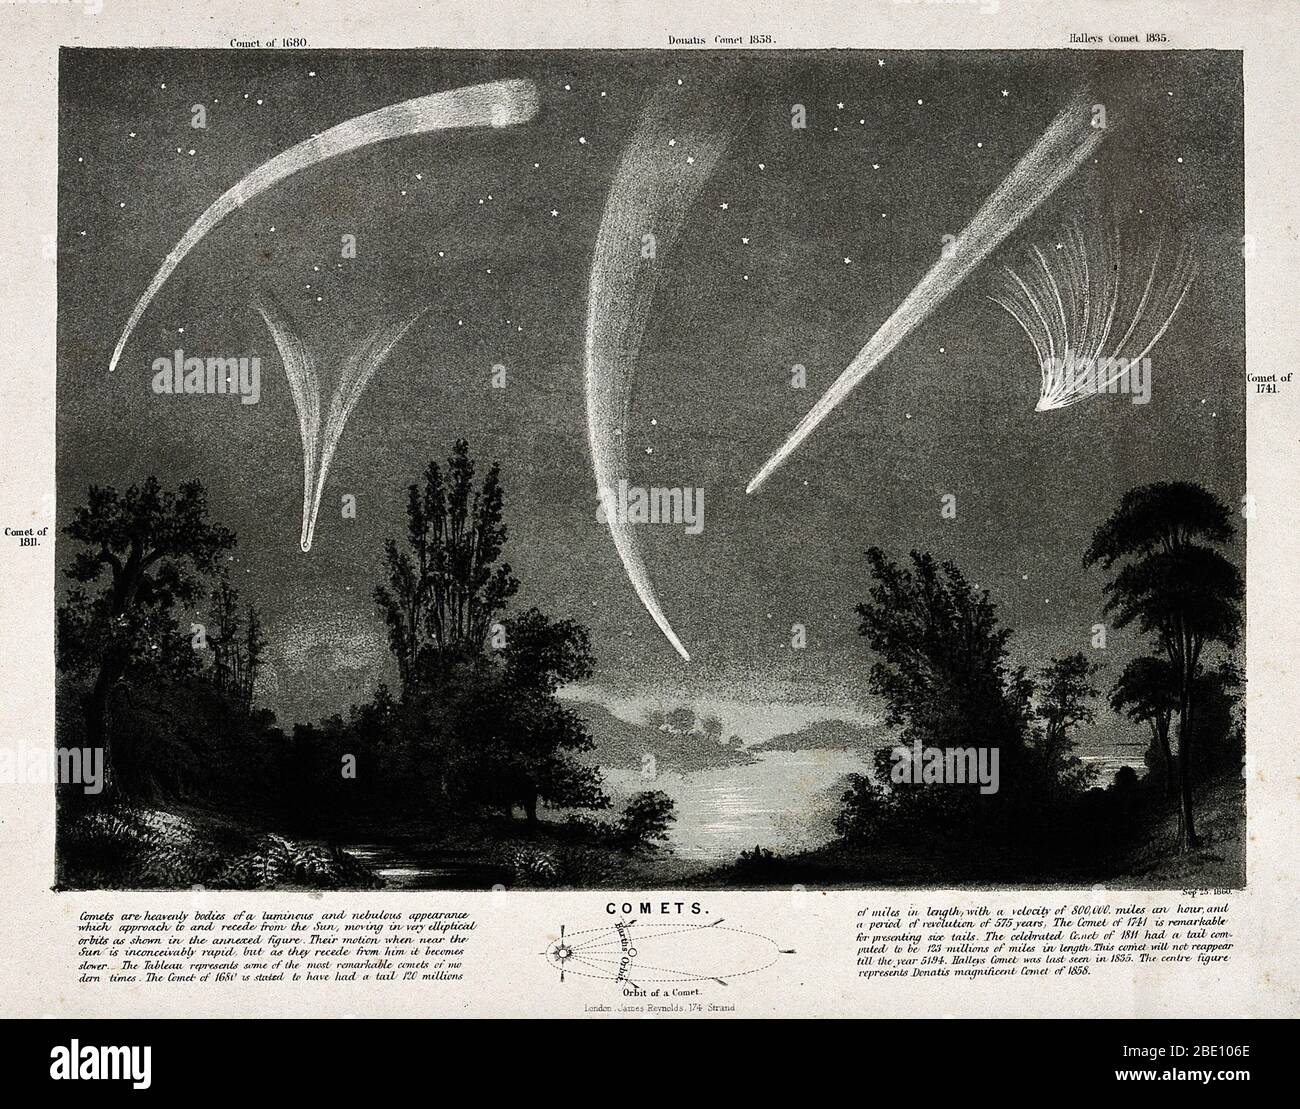 An engraving of various comets with dust tails from the 1600s to the 1800s, including Comet of 1680, Donatus Comet of 1858, Halley's Comet of 1835, Comet of 1741, and Comet of 1811. Stock Photo